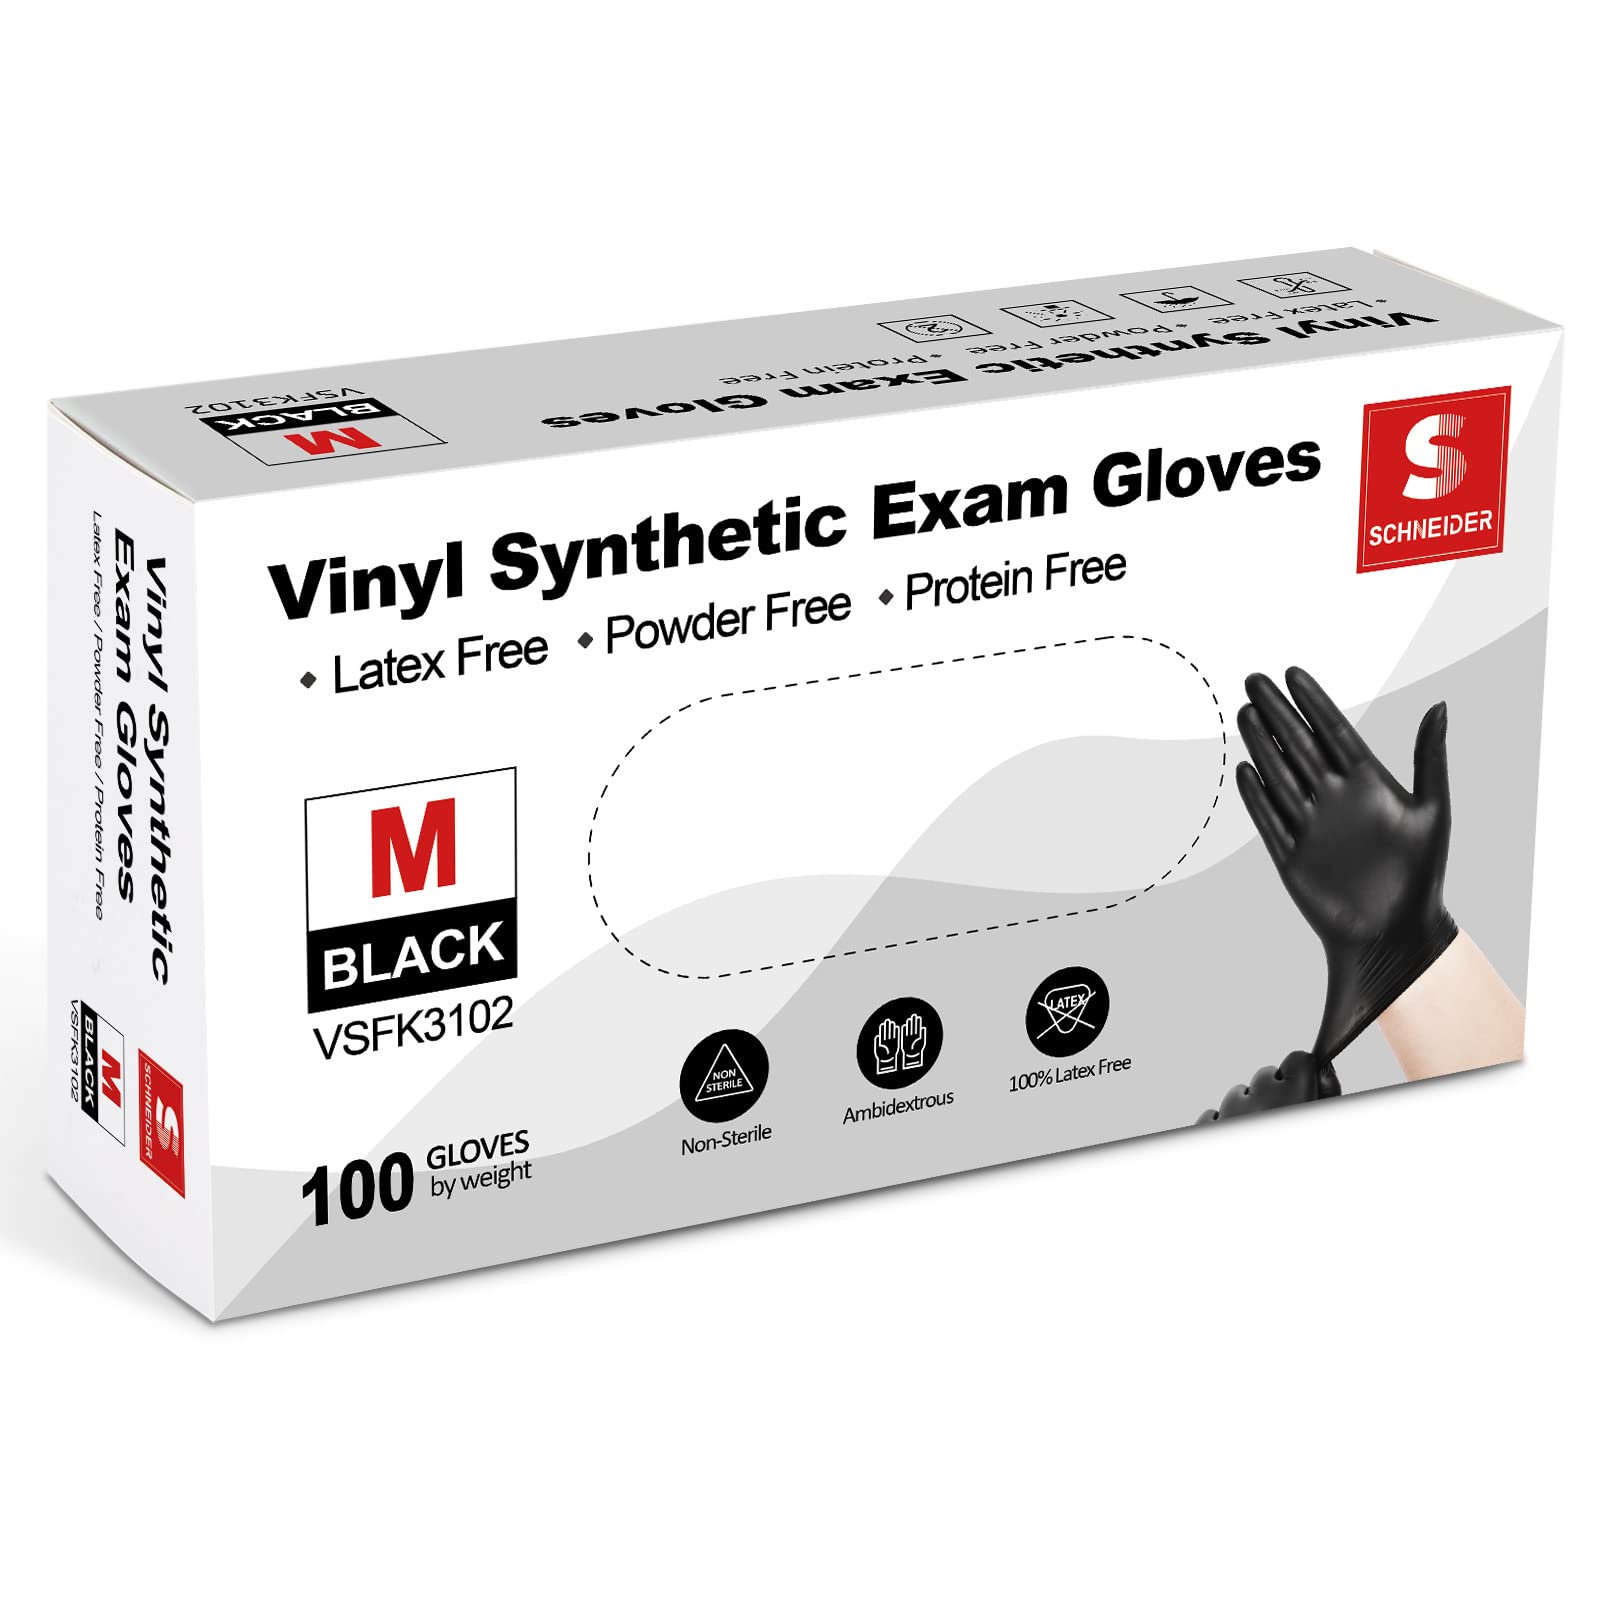 Schneider Black Vinyl Exam Disposable Gloves, 4mil, Latex-Free, Plastic Gloves for Medical, Cooking, Cleaning, and Food Prep, Surgical, Powder-Free, Non-Sterile, 100-ct Box (Small)